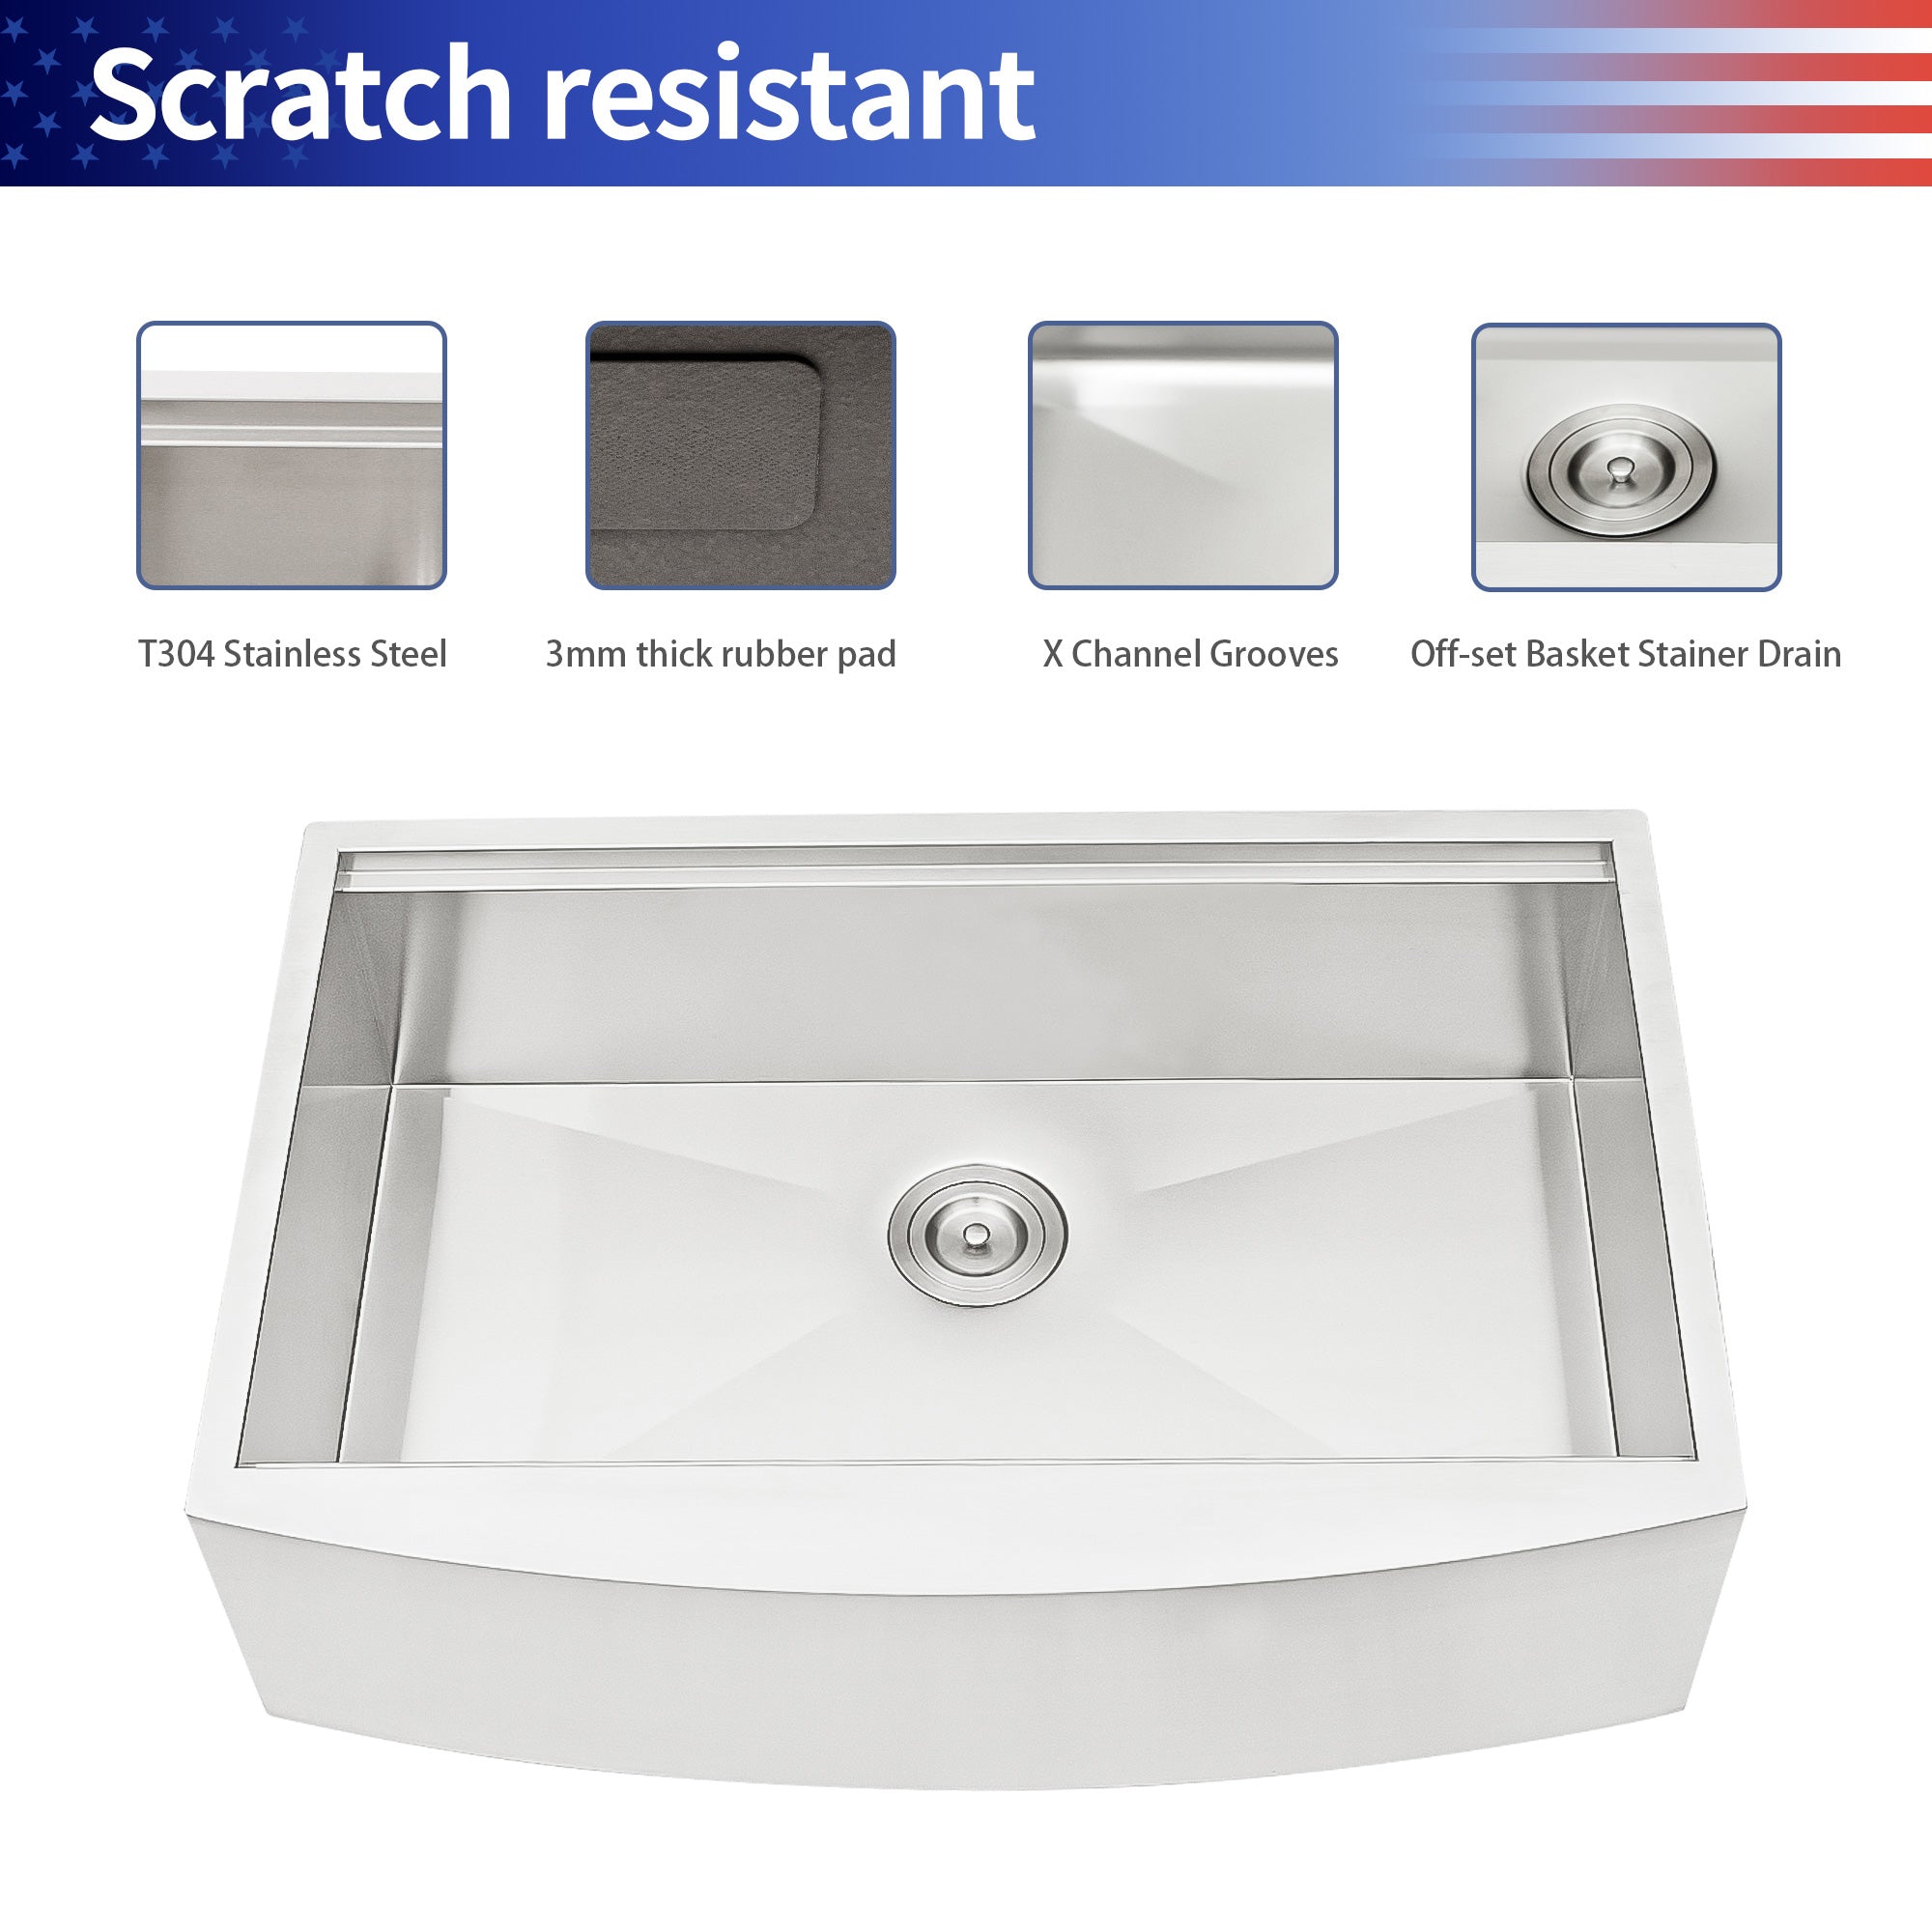 Farmhouse Apron Single Bowl Stainless Steel Kitchen Sink with Workstation RX-SS07